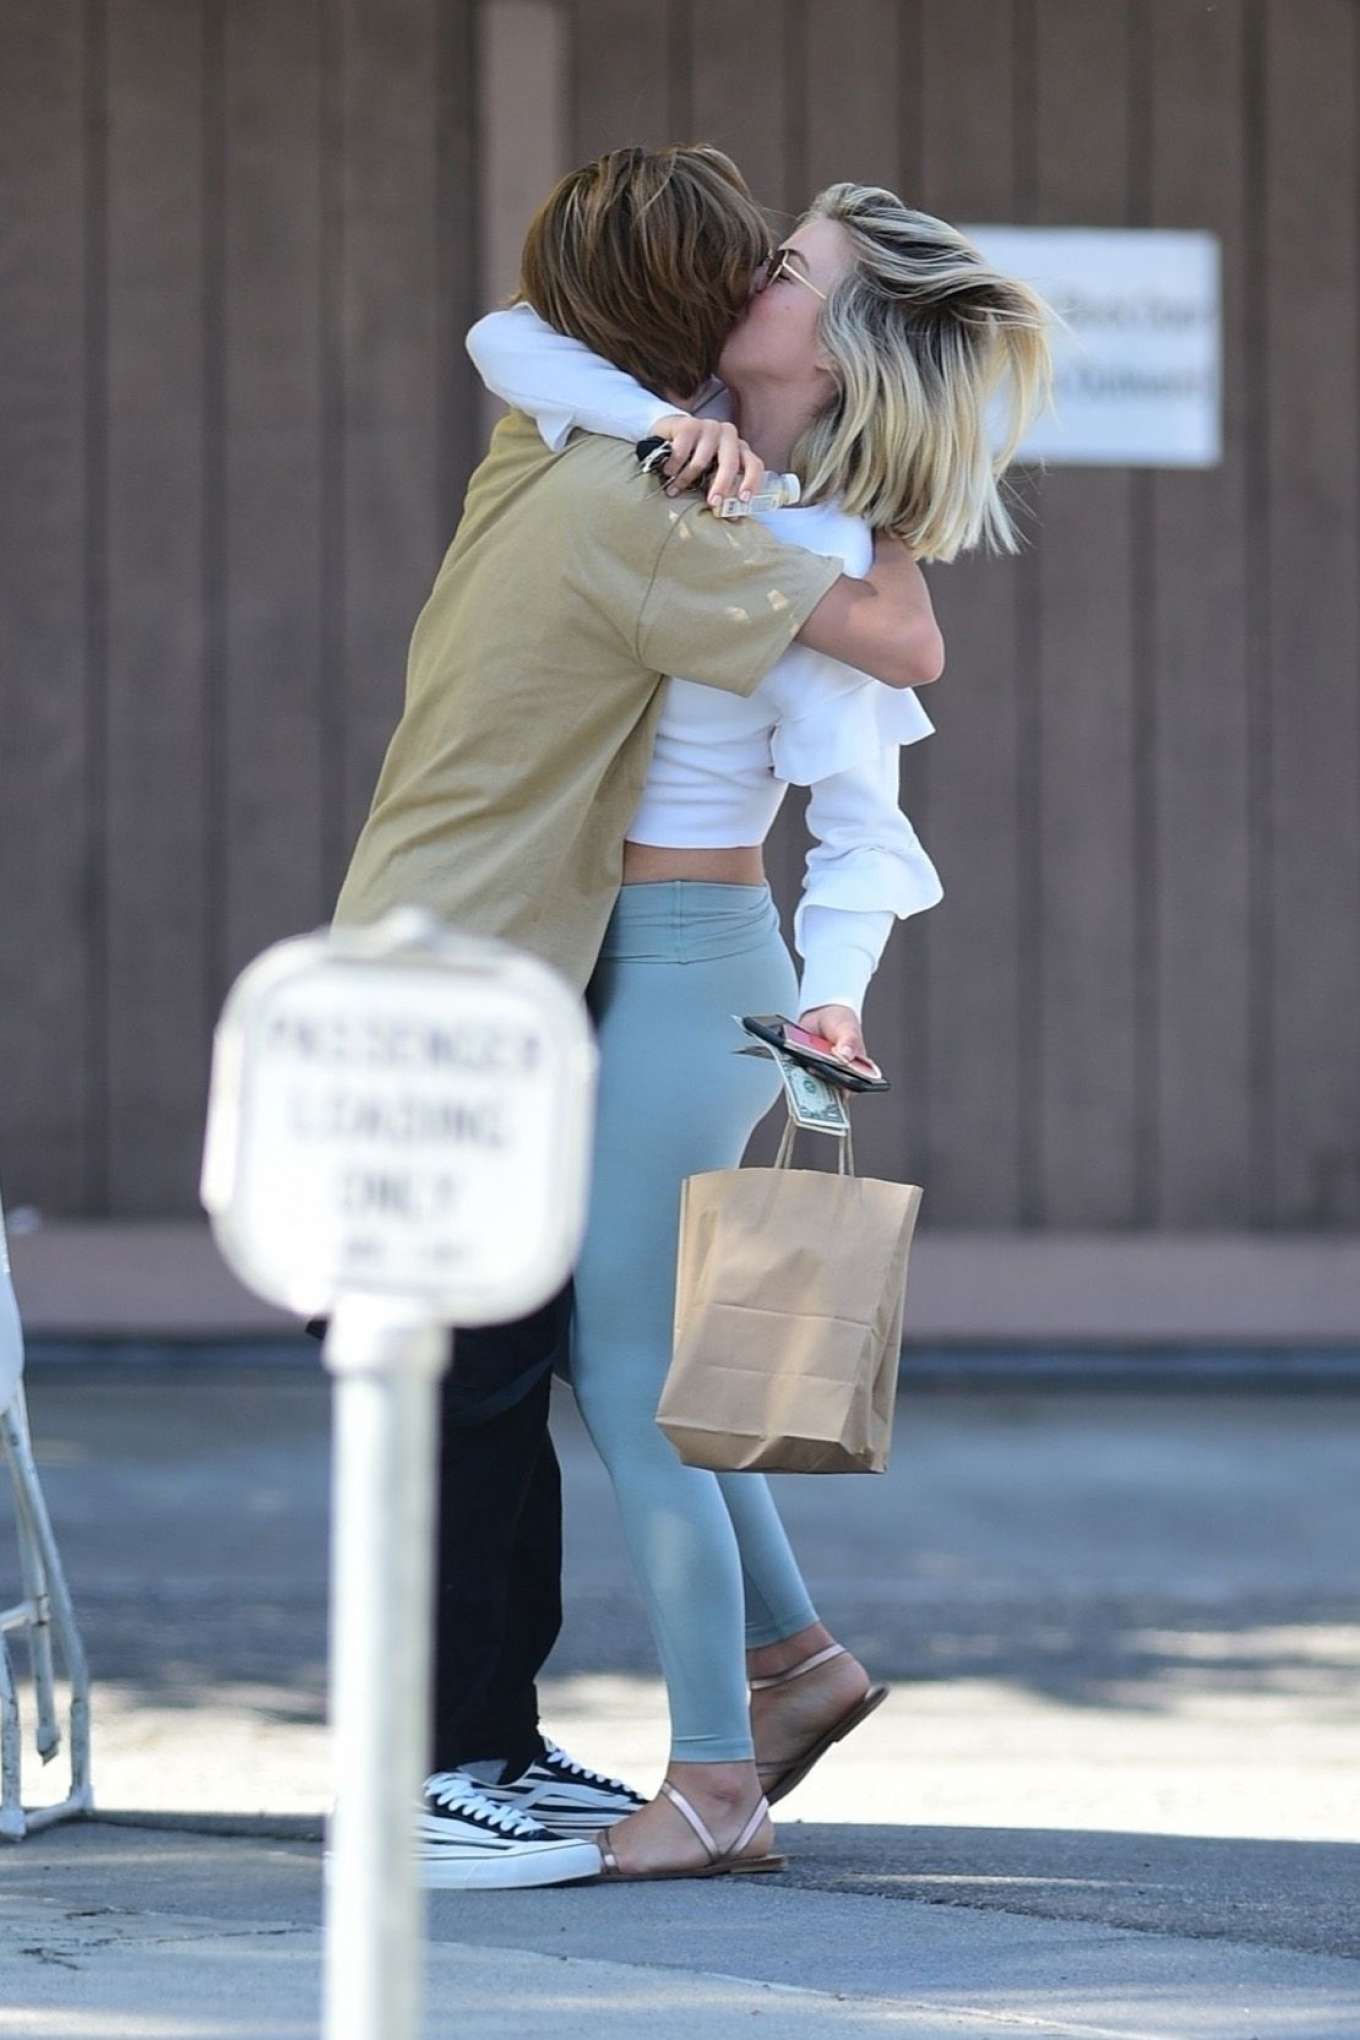 Julianne Hough â€“ Spotted with her brother Derek Hough in Sherman Oaks